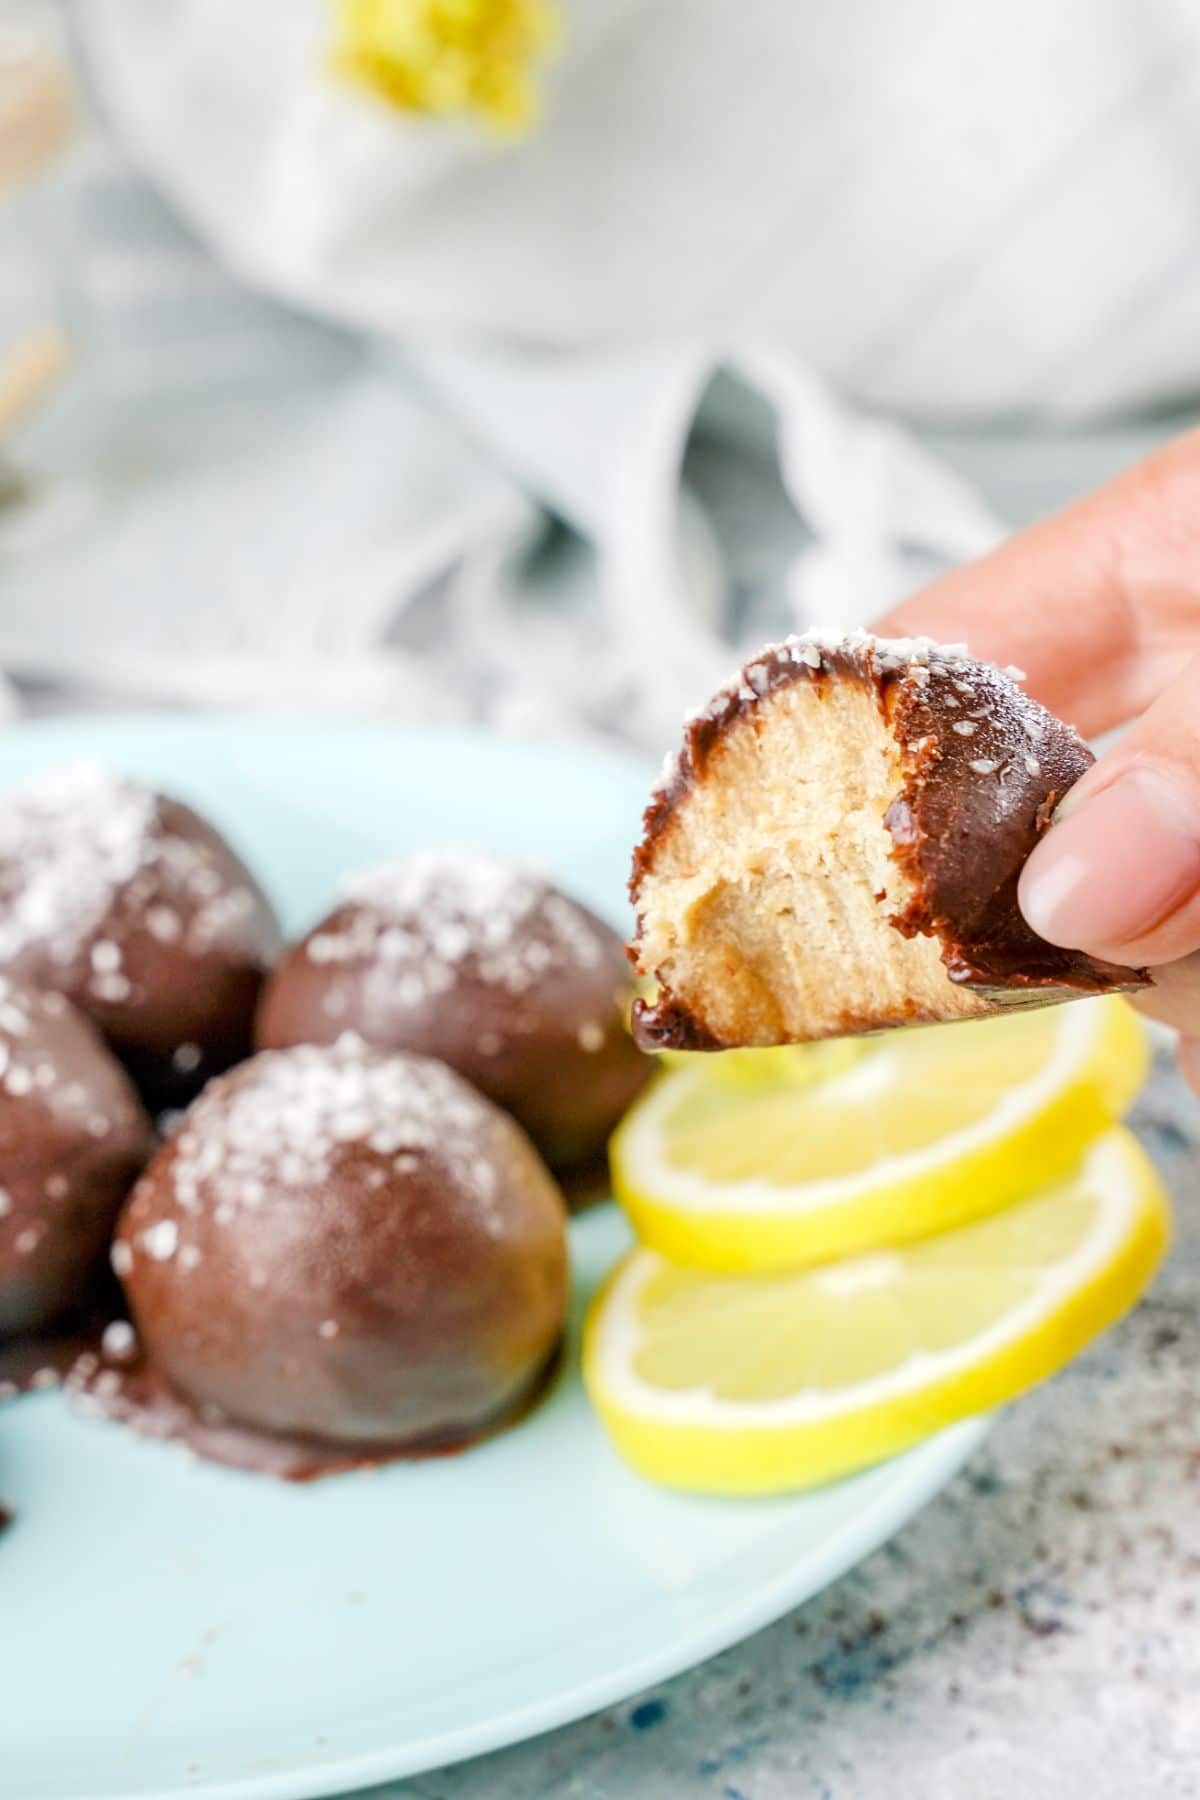 A bite of Sweet No-Bake Cookies served with lemon slices